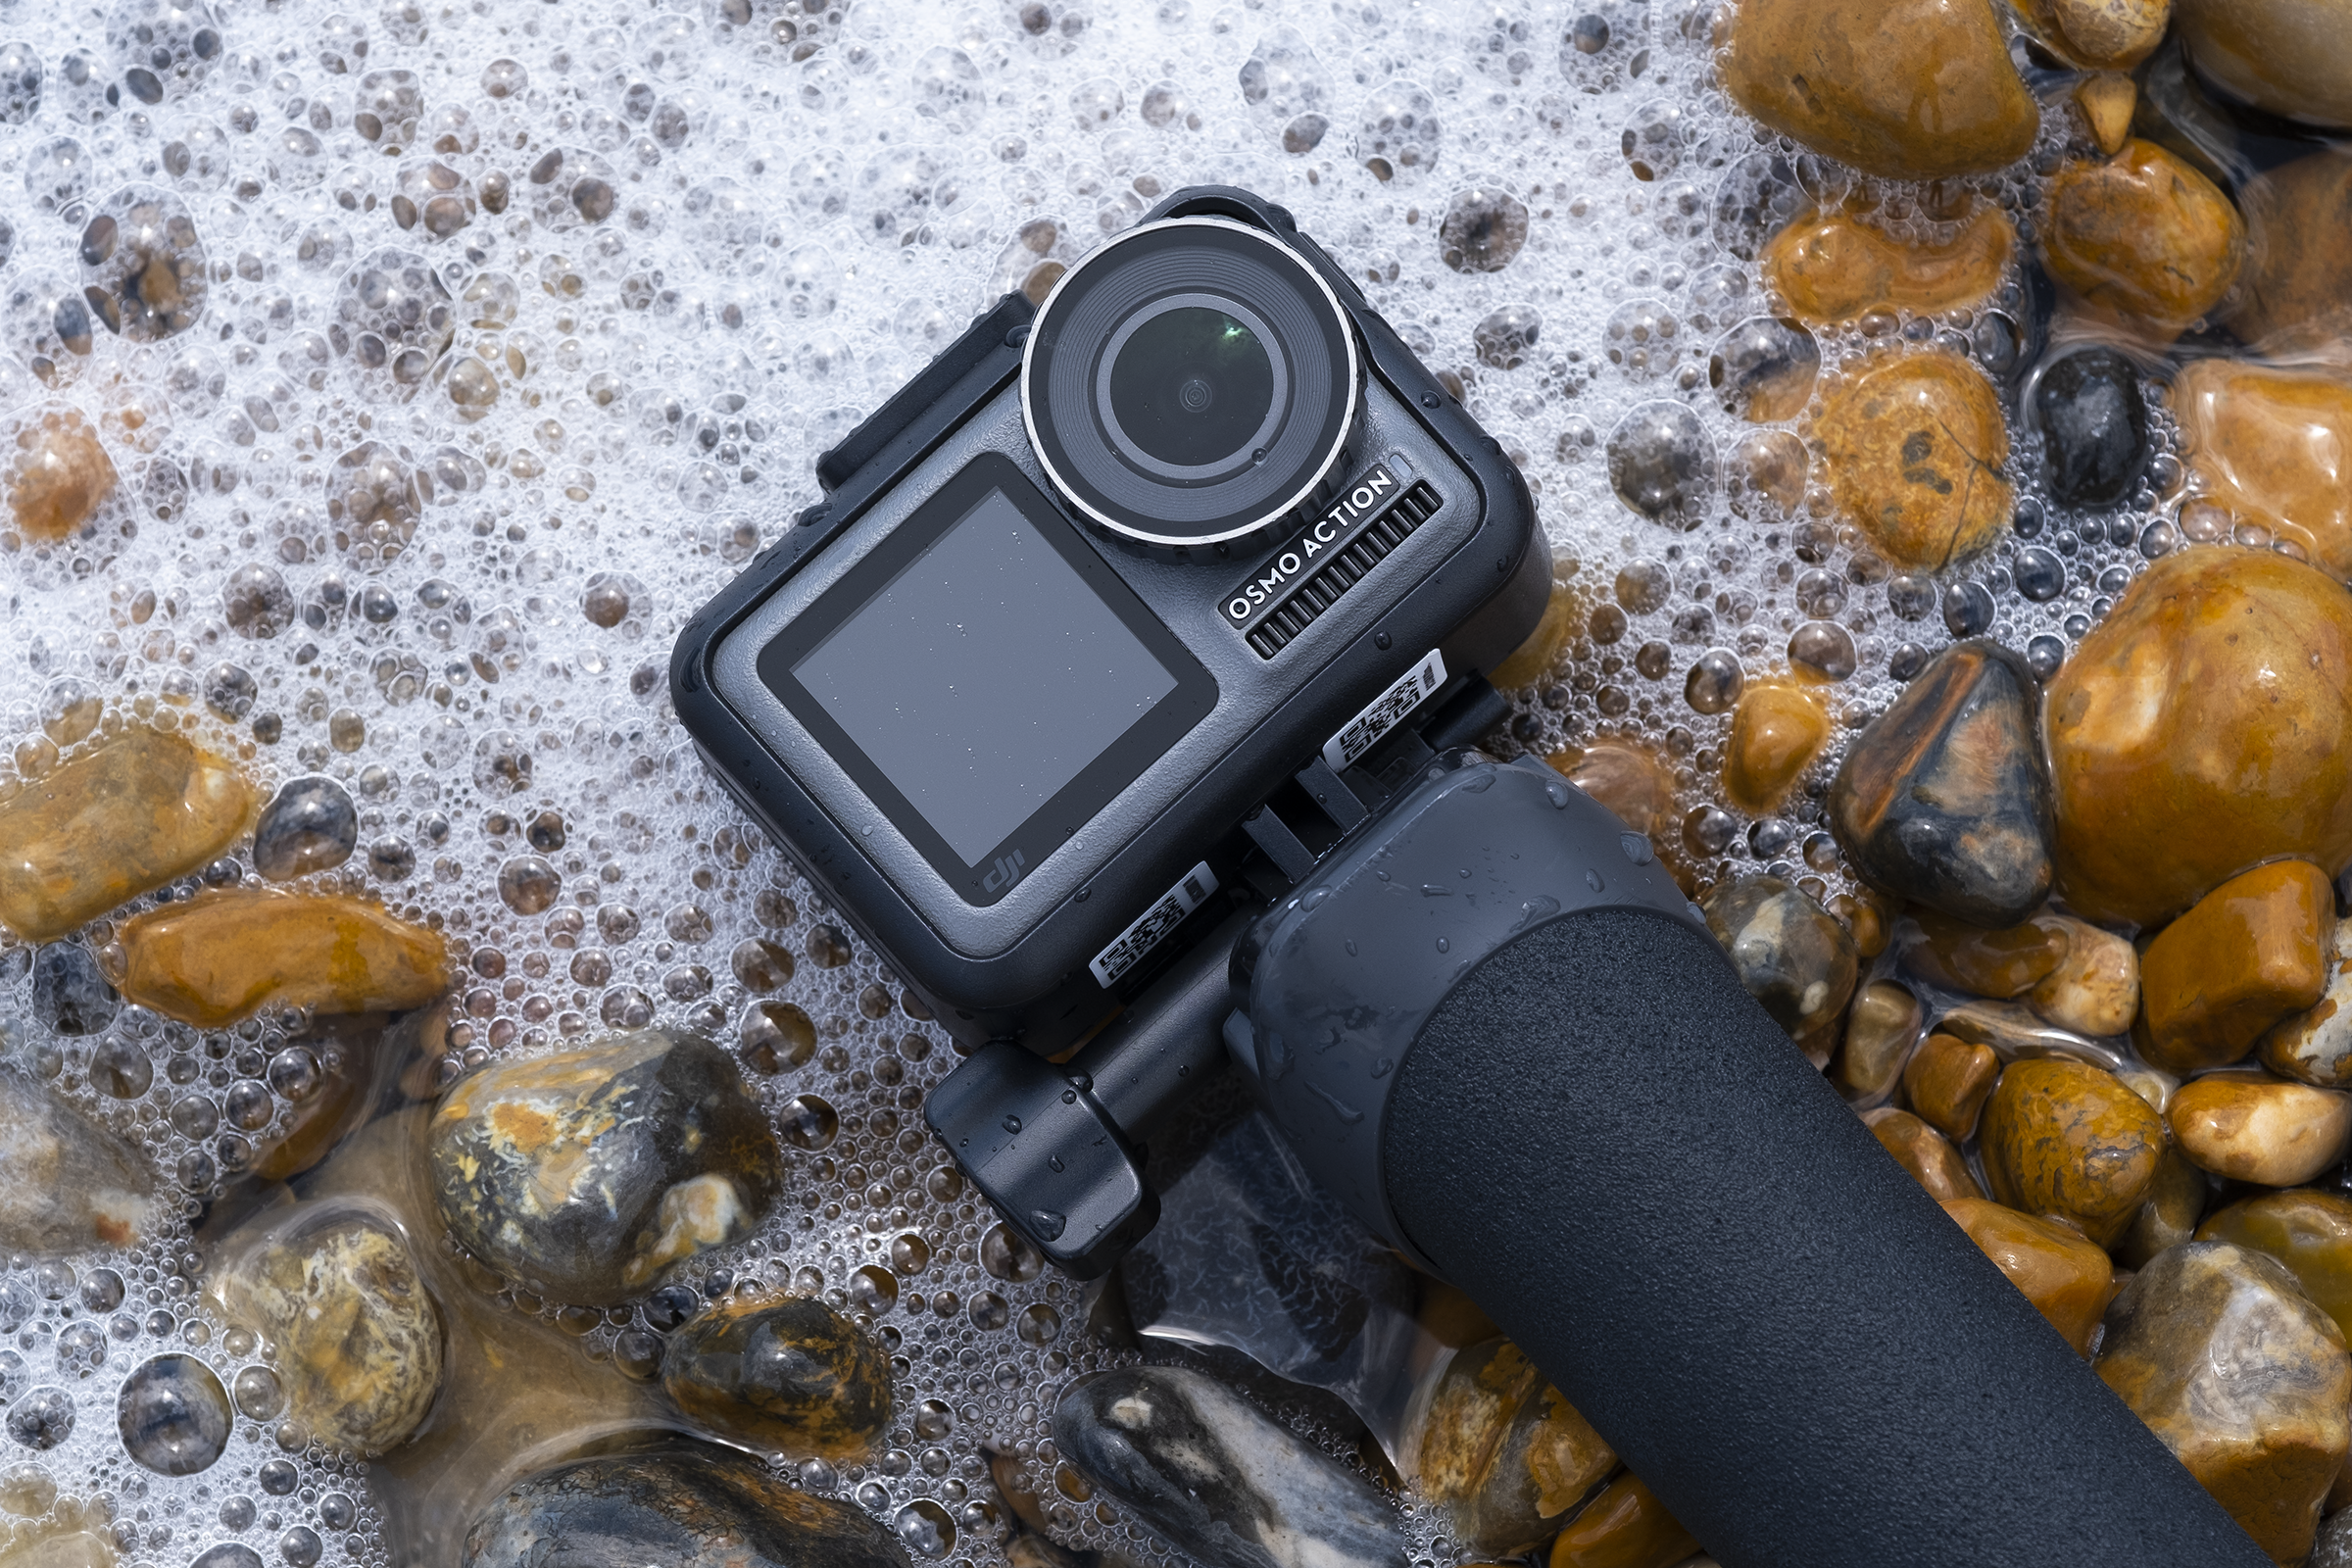 DJI Osmo Review | Trusted